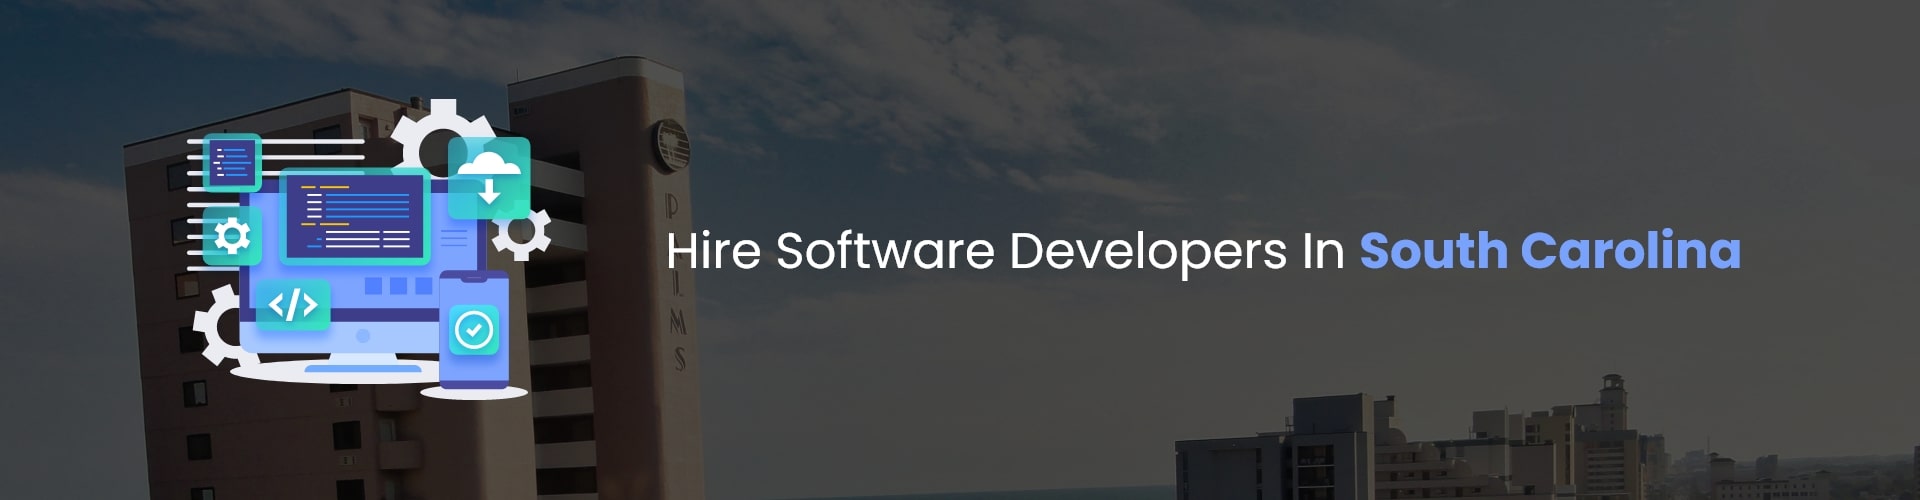 hire software developers in south carolina